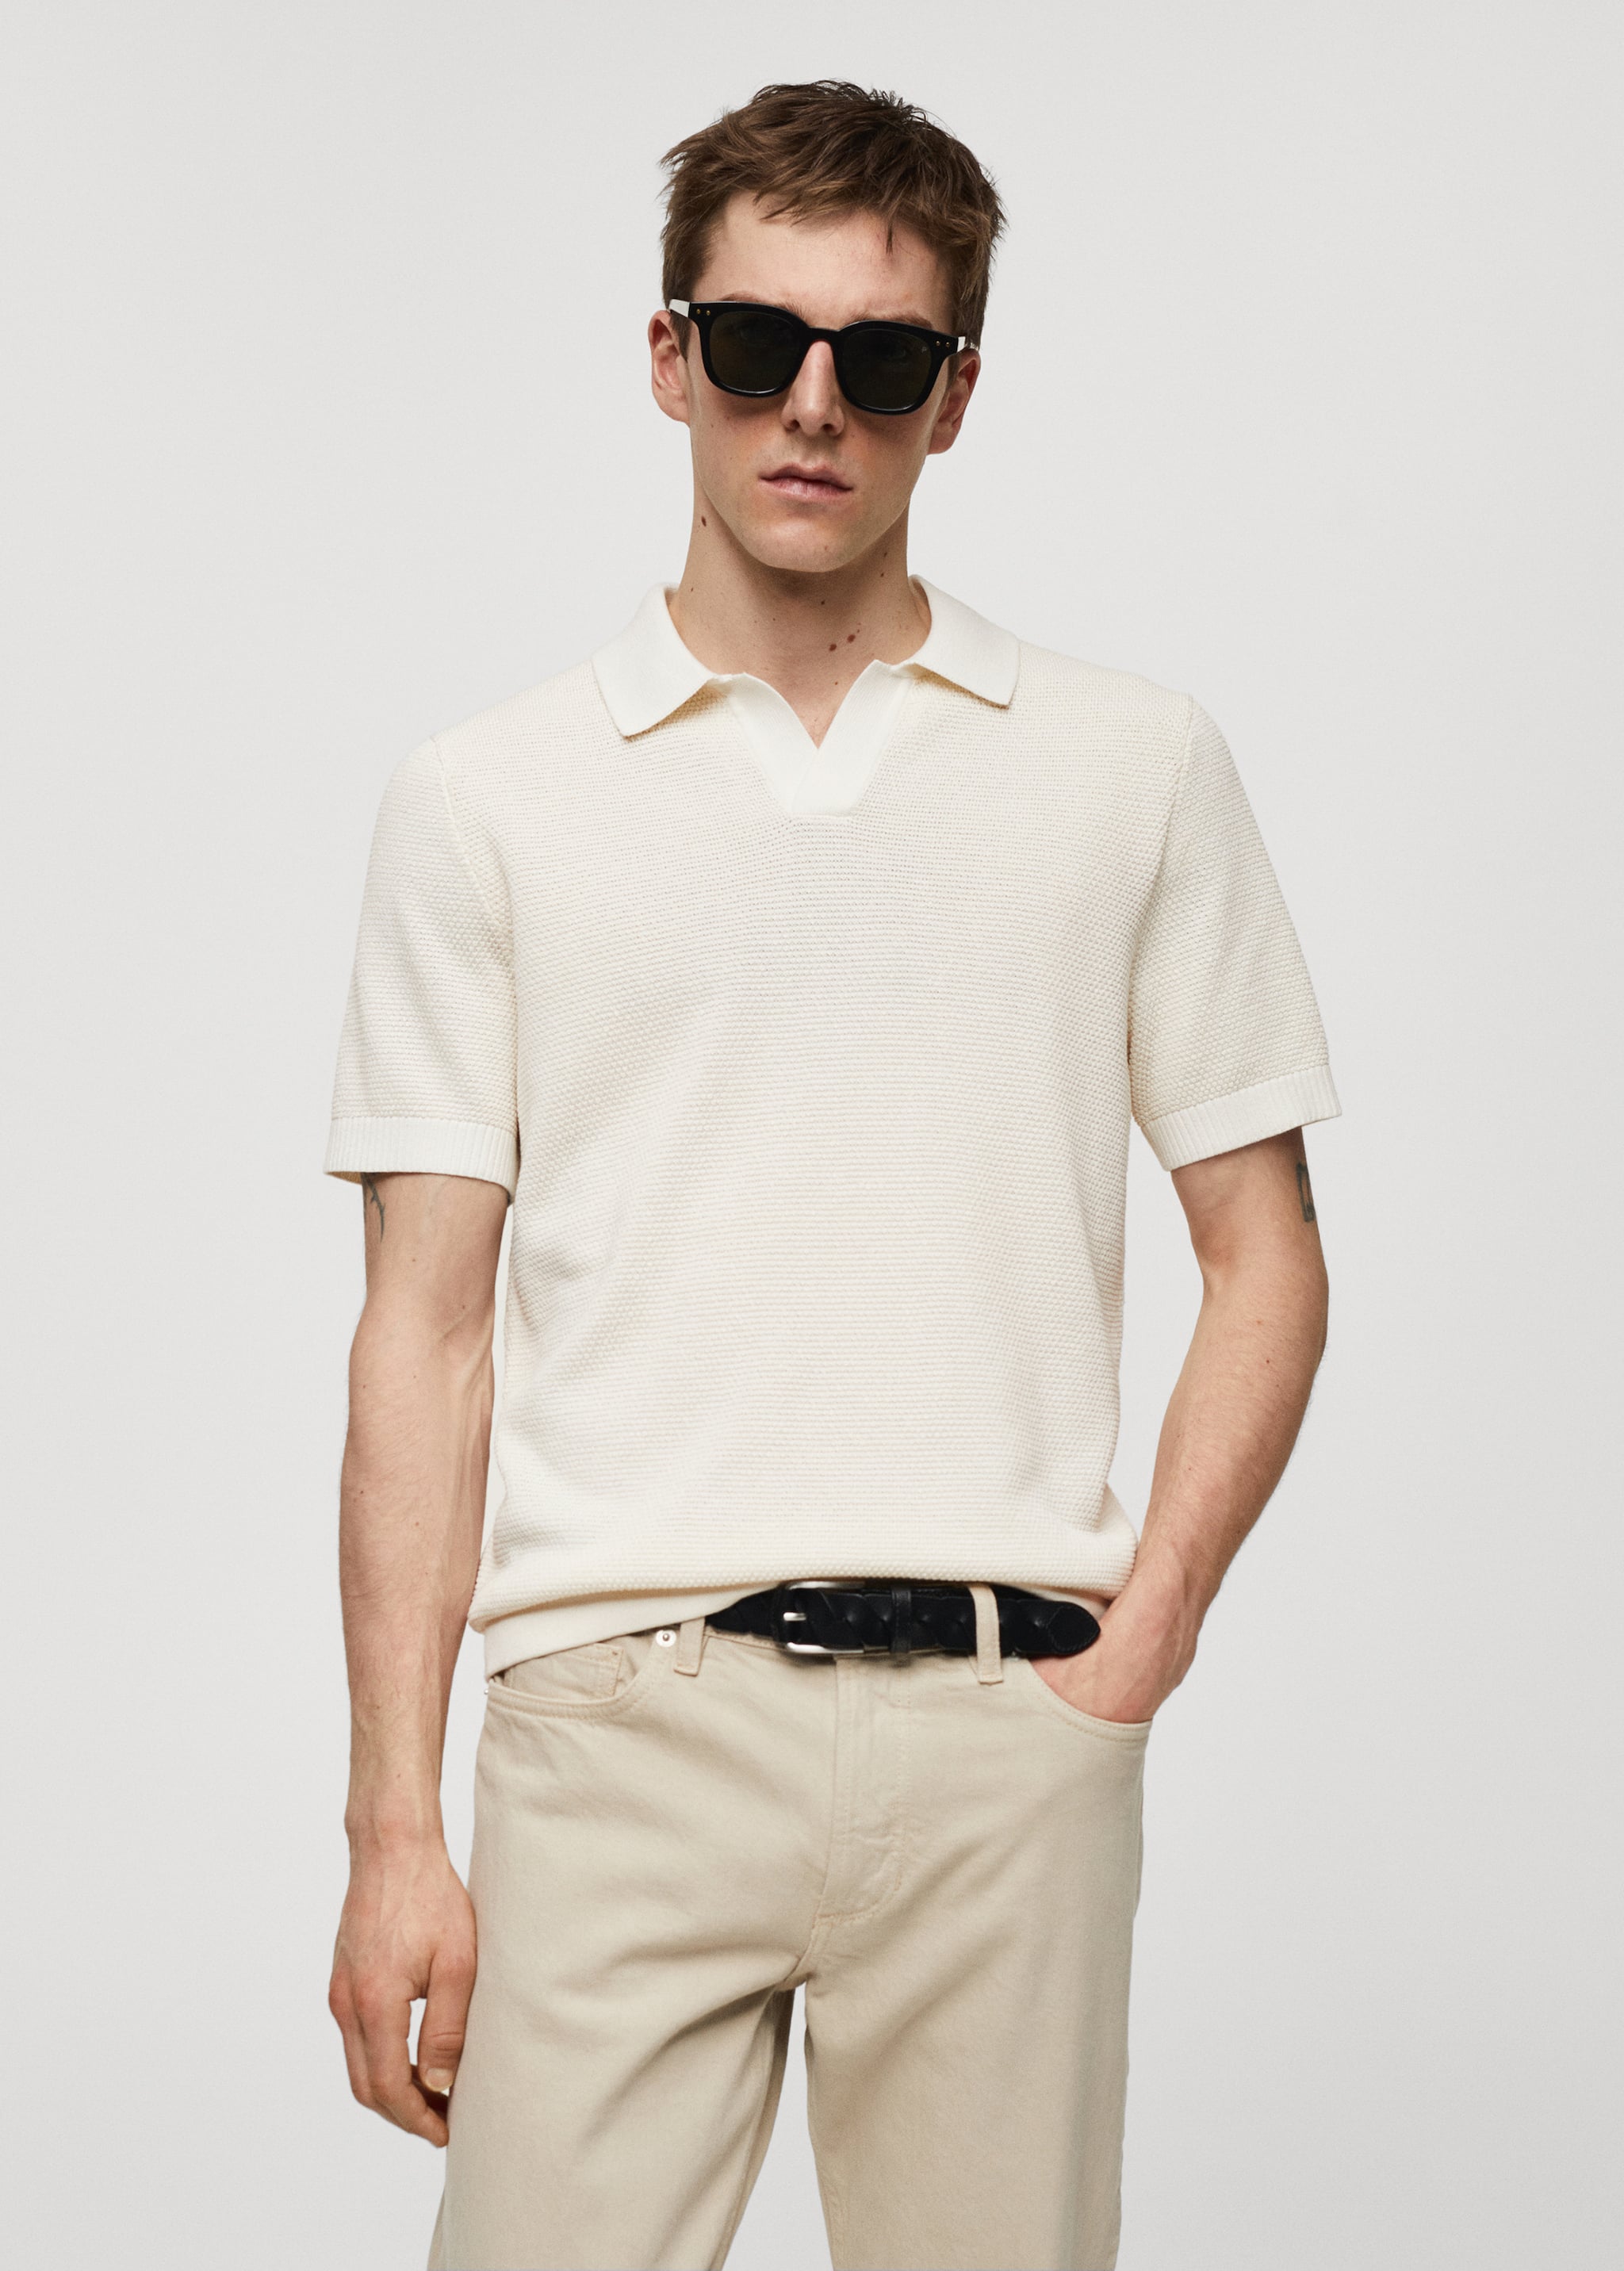 Structured knitted polo shirt - Medium plane